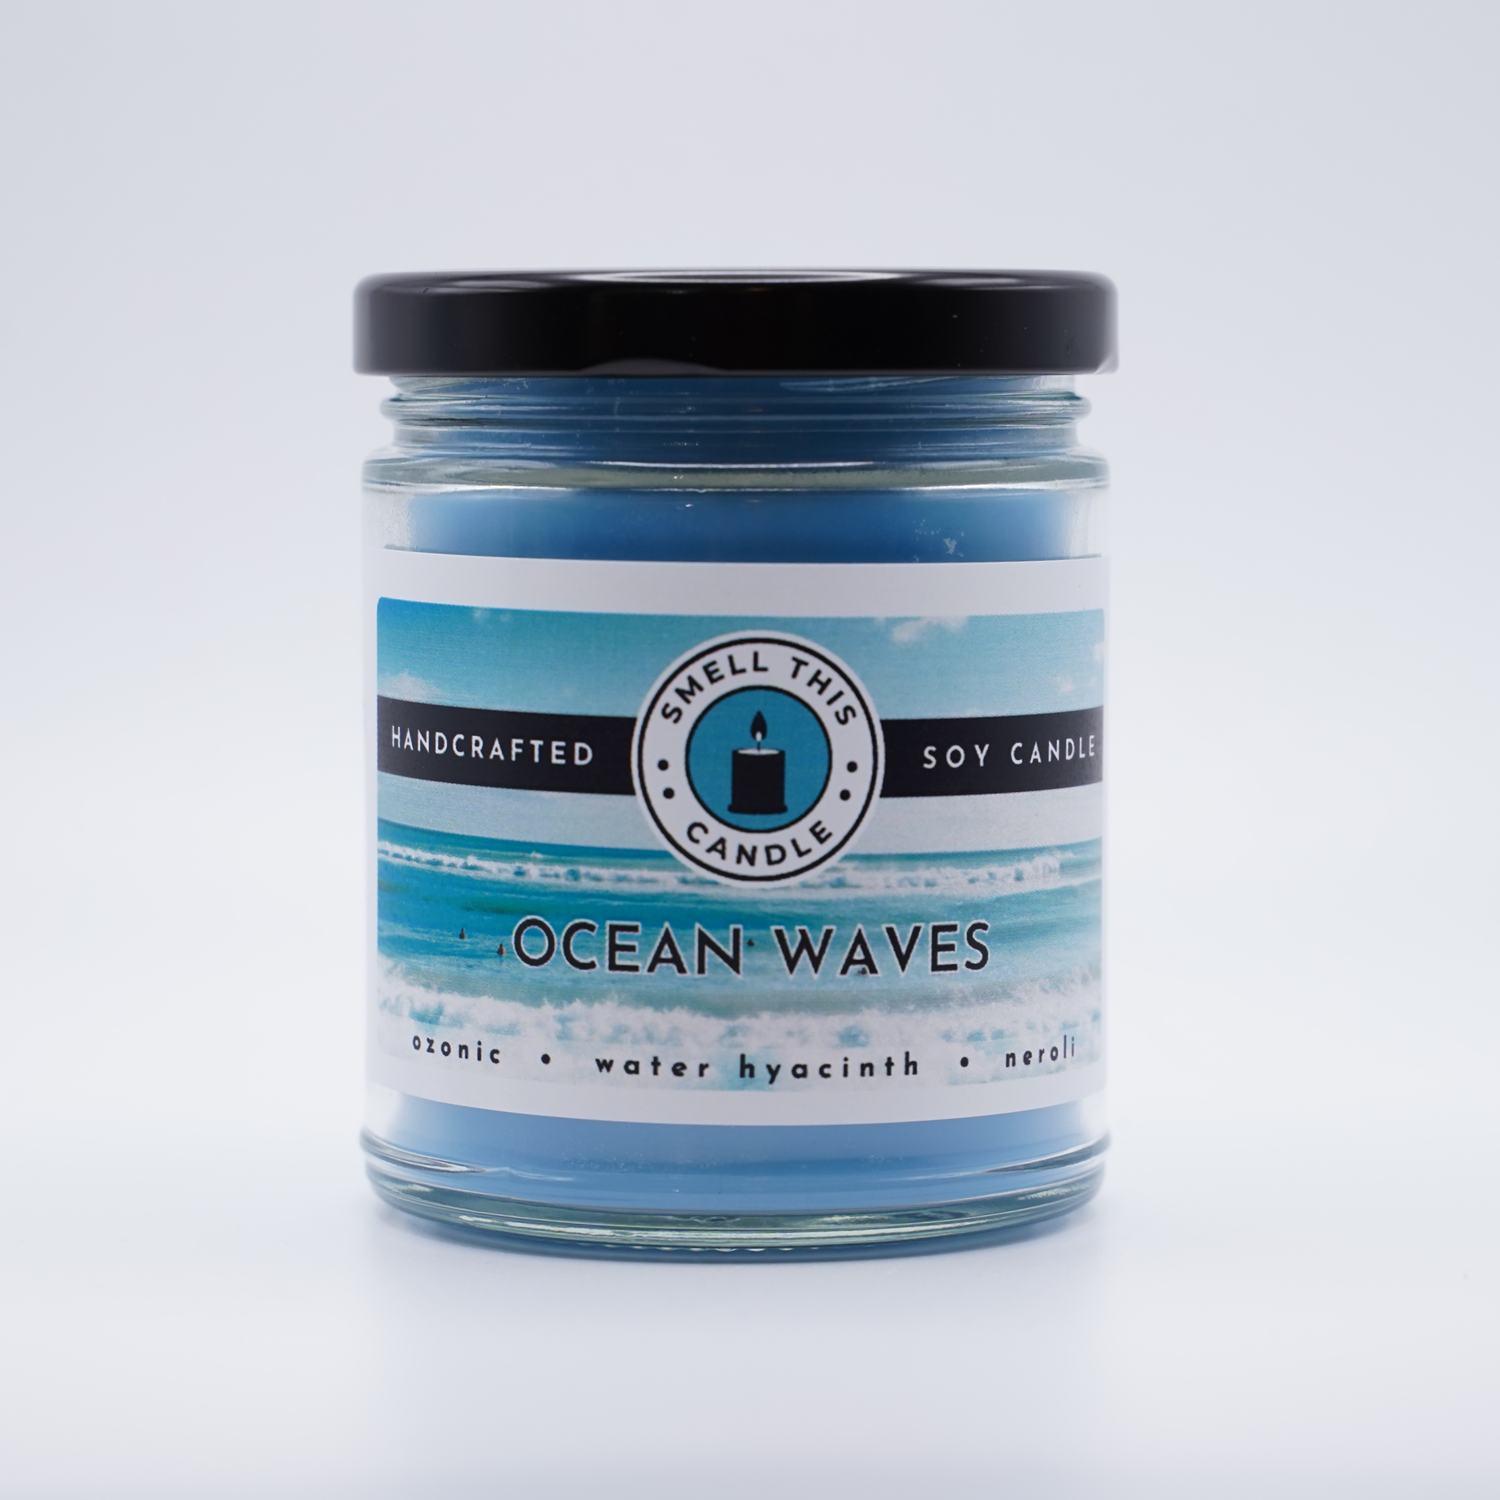 Ocean Waves candle - Smell This Candle - Candles